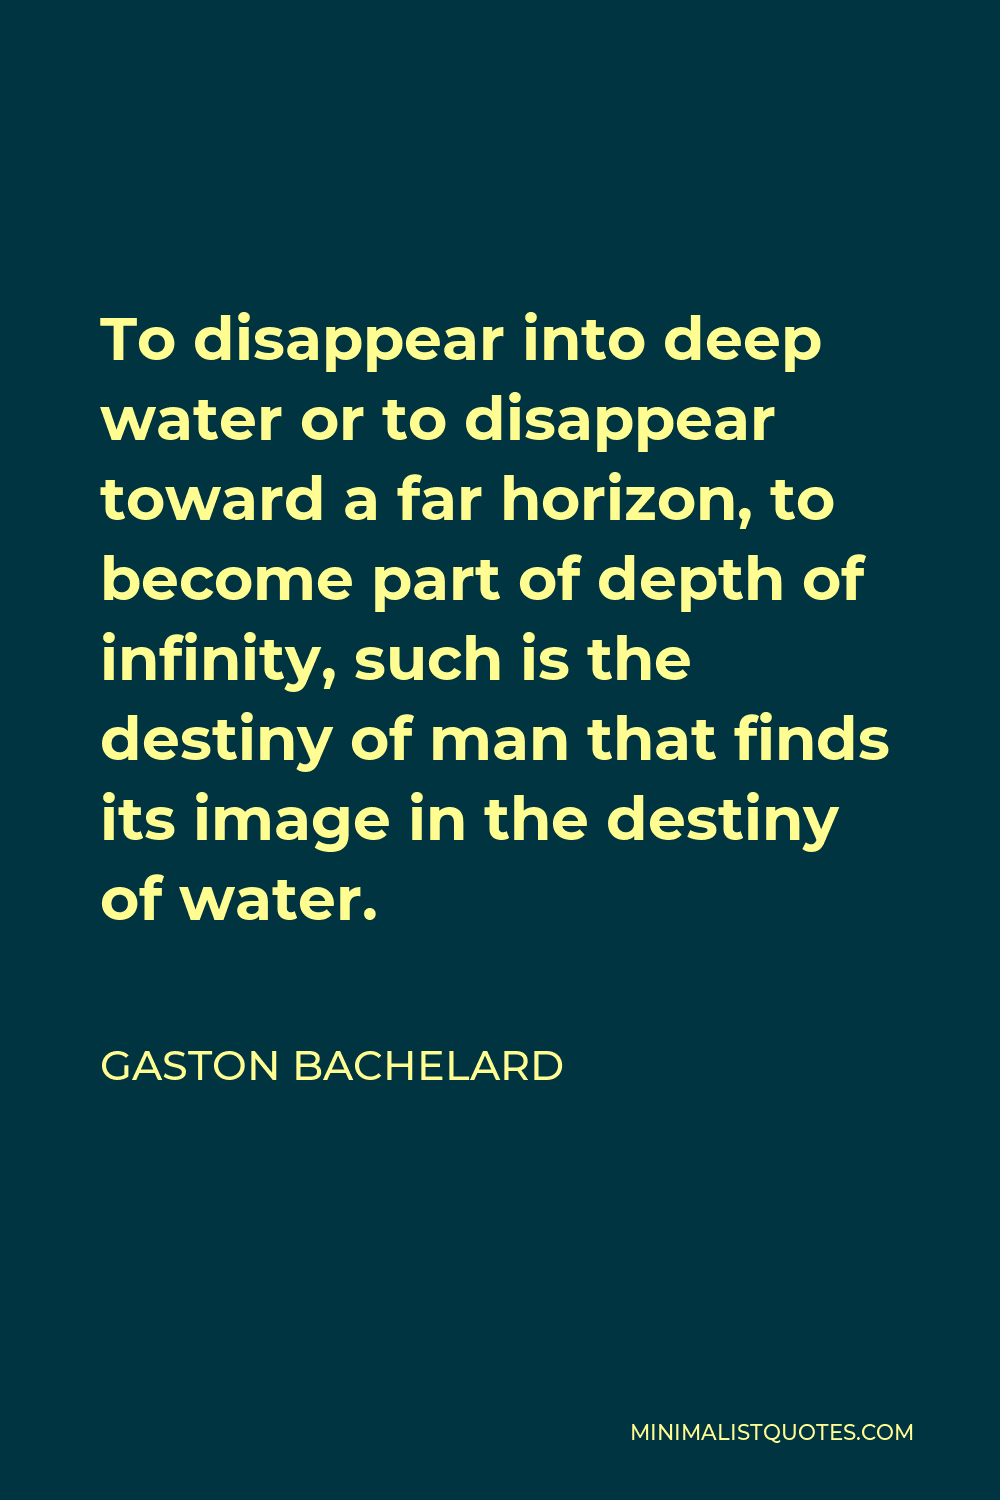 Gaston Bachelard Quote - To disappear into deep water or to disappear toward a far horizon, to become part of depth of infinity, such is the destiny of man that finds its image in the destiny of water.